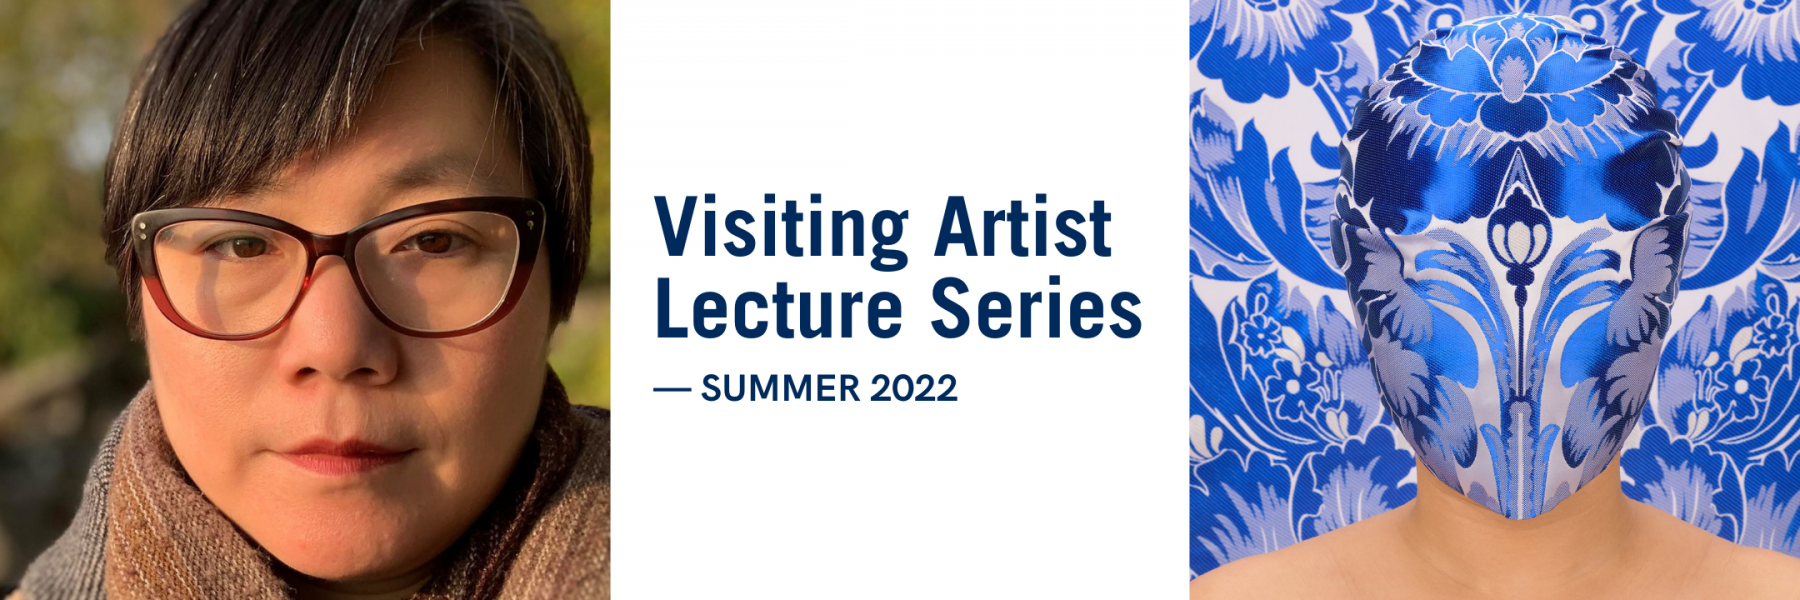 Visiting Artist Lecture Series | Summer 2022 Banner